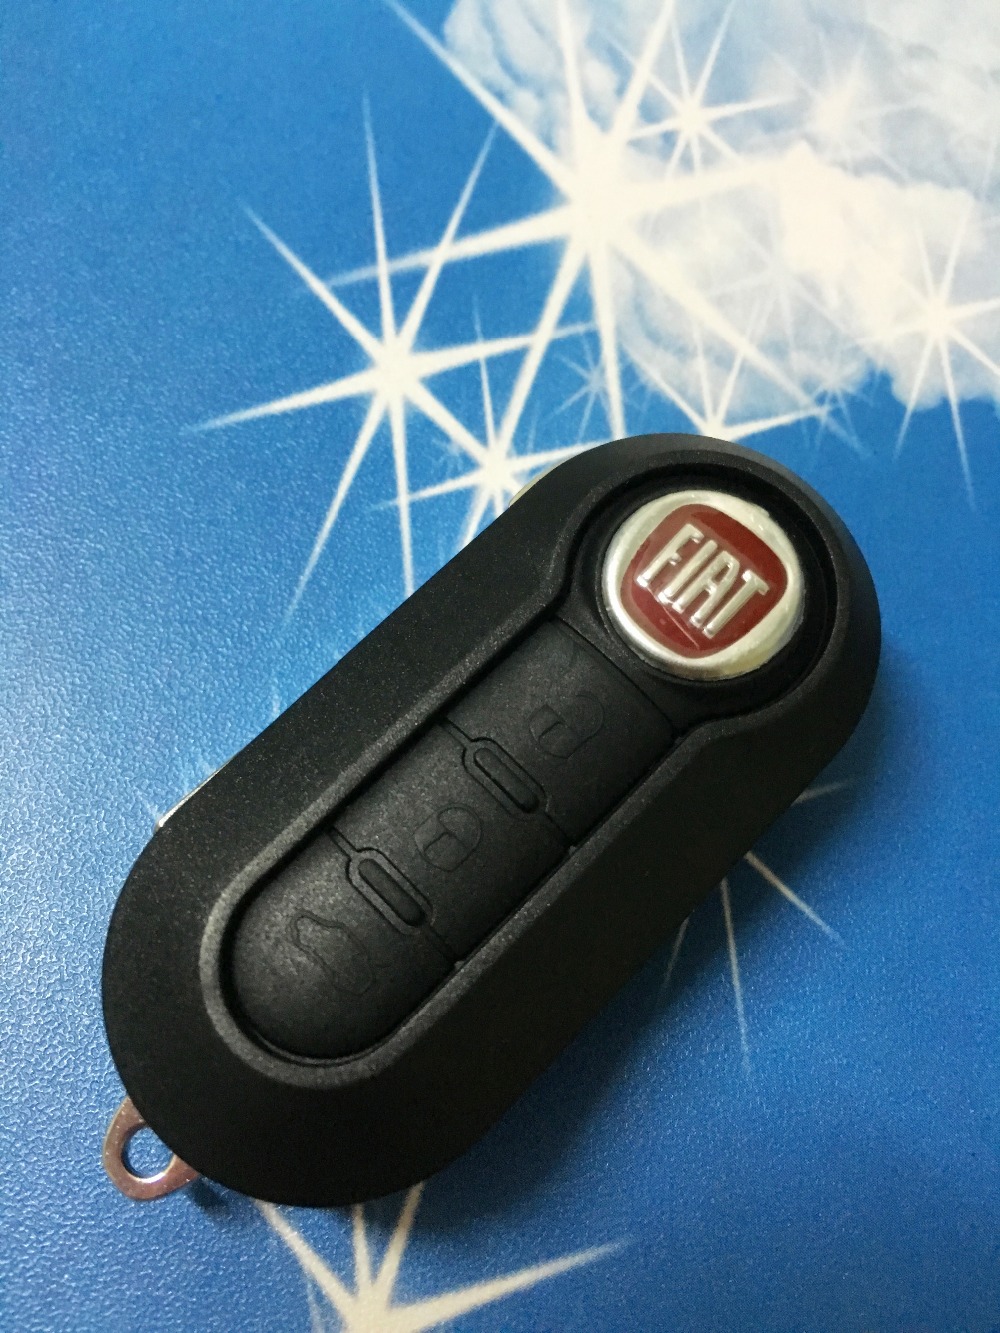 Image of 3 Buttons Flip Remote Key COMBO Case Shell Cover Housing for FIAT 500 Panda Punto Bravo Car Alarm Keyless Entry Fob